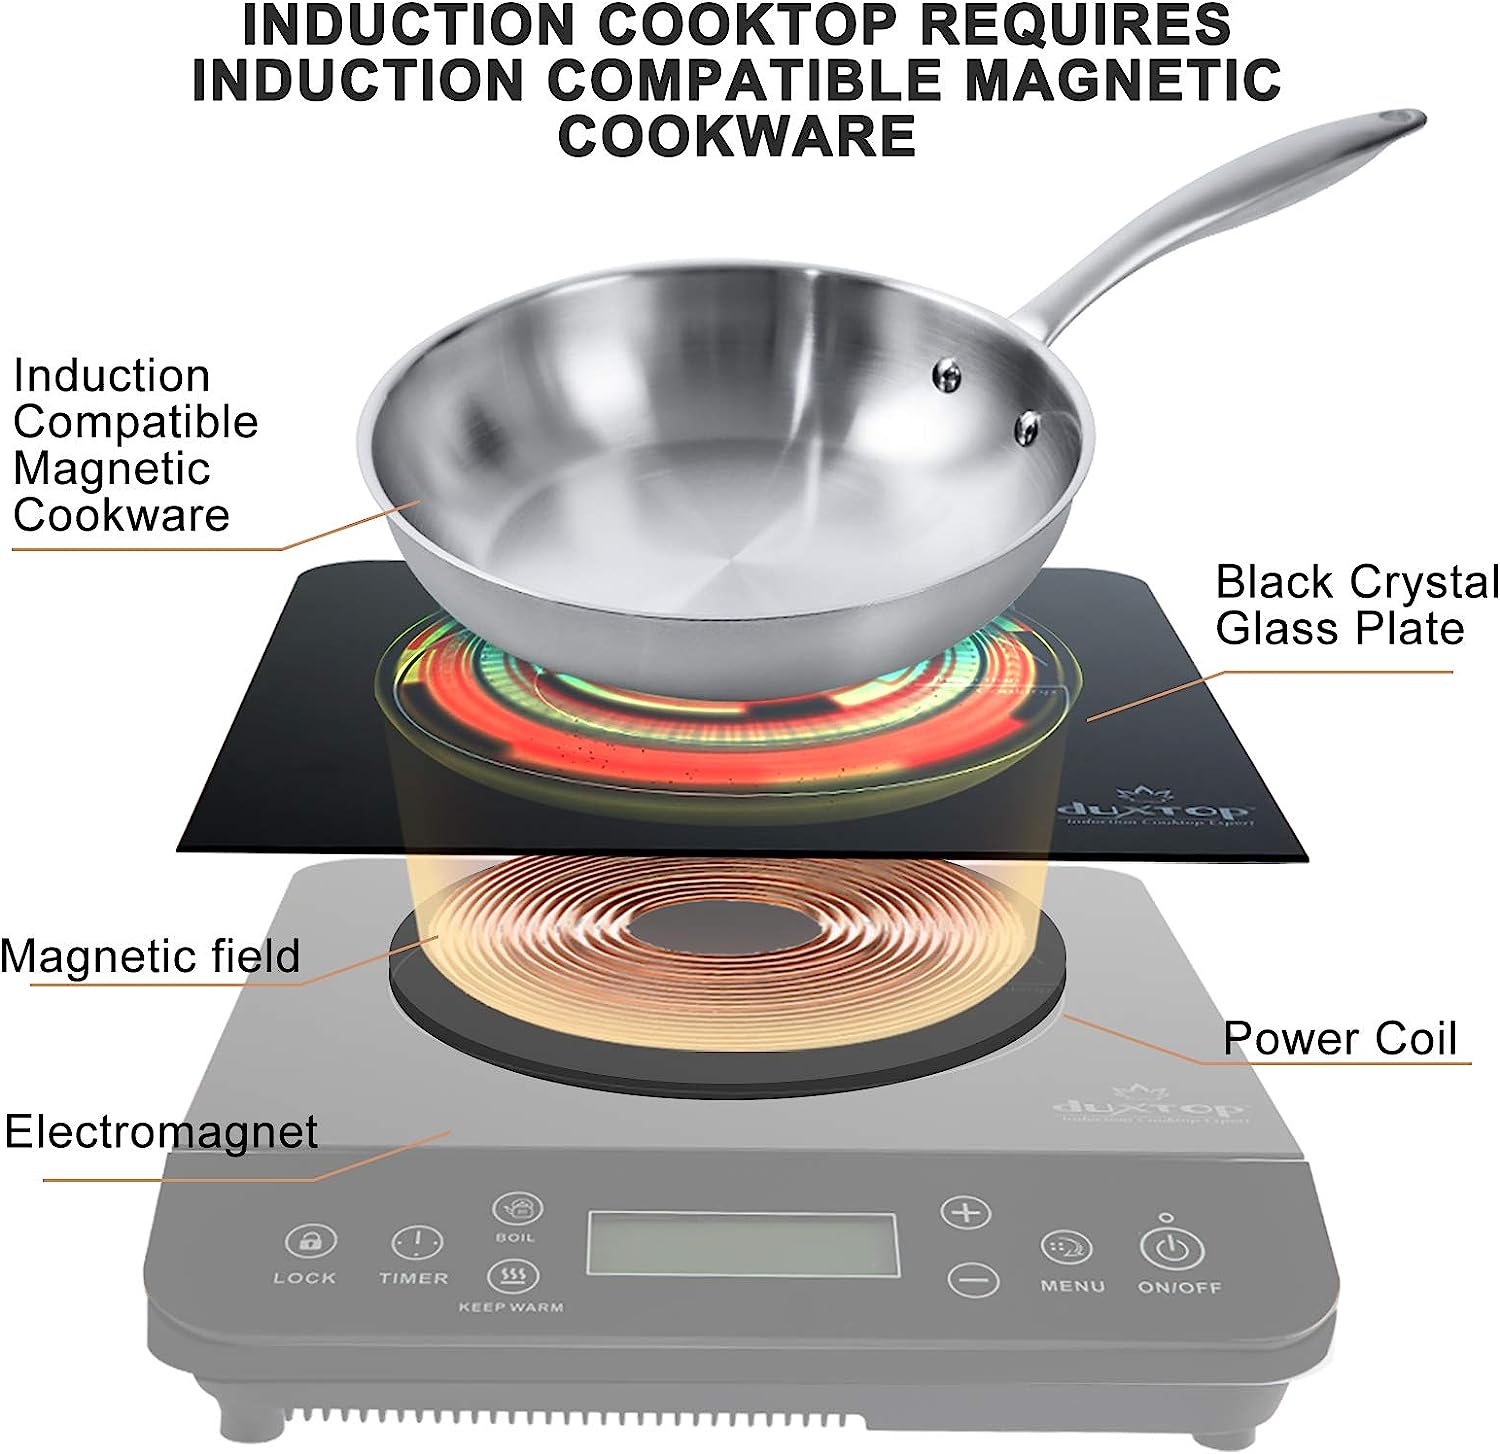 Duxtop Professional Portable Induction Cooktop & Portable Induction  Cooktop, Countertop Burner Induction Hot Plate with LCD Sensor Touch 1800  Watts